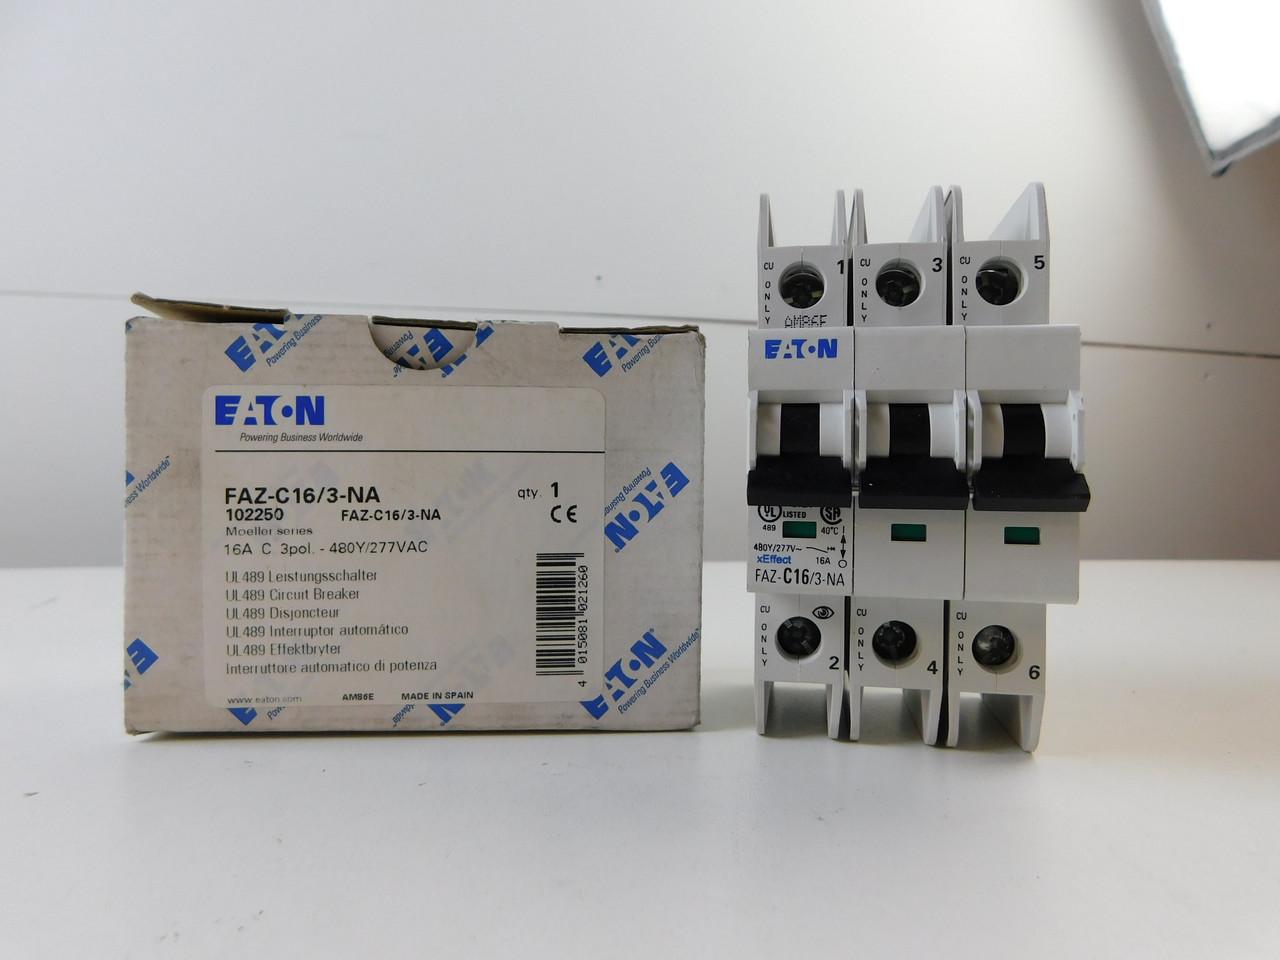 Eaton FAZ-C16/3-NA 277/480 VAC 50/60 Hz, 16 A, 3-Pole, 10/14 kA, 5 to 10 x Rated Current, Screw Terminal, DIN Rail Mount, Standard Packaging, C-Curve, Current Limiting, Thermal Magnetic